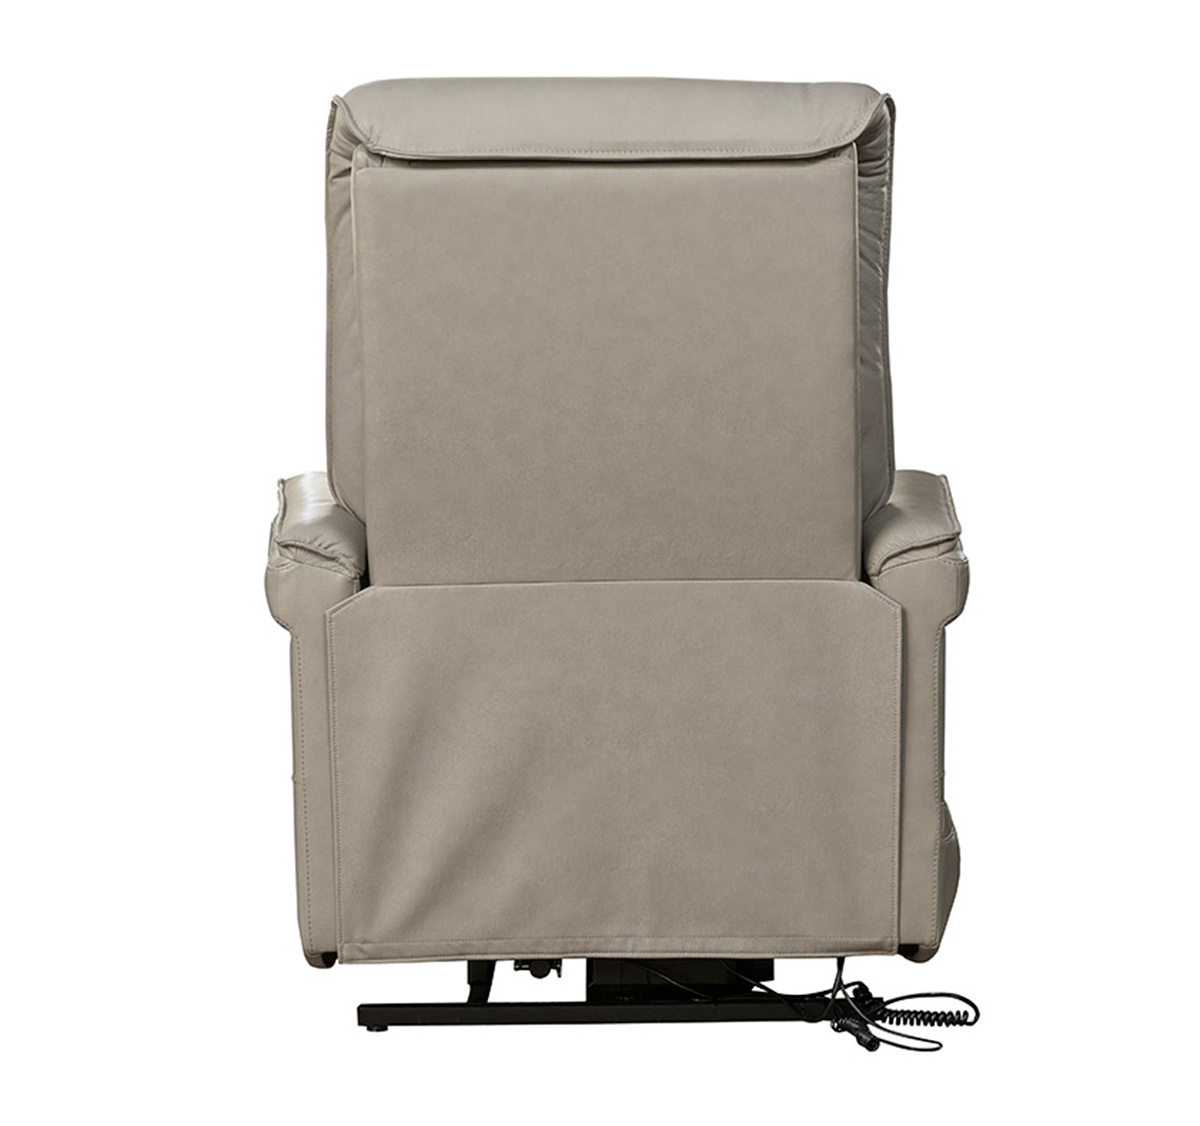 Barcalounger Luka Lift Chair Recliner with Power Head Rest - Venzia Cream/Leather Match